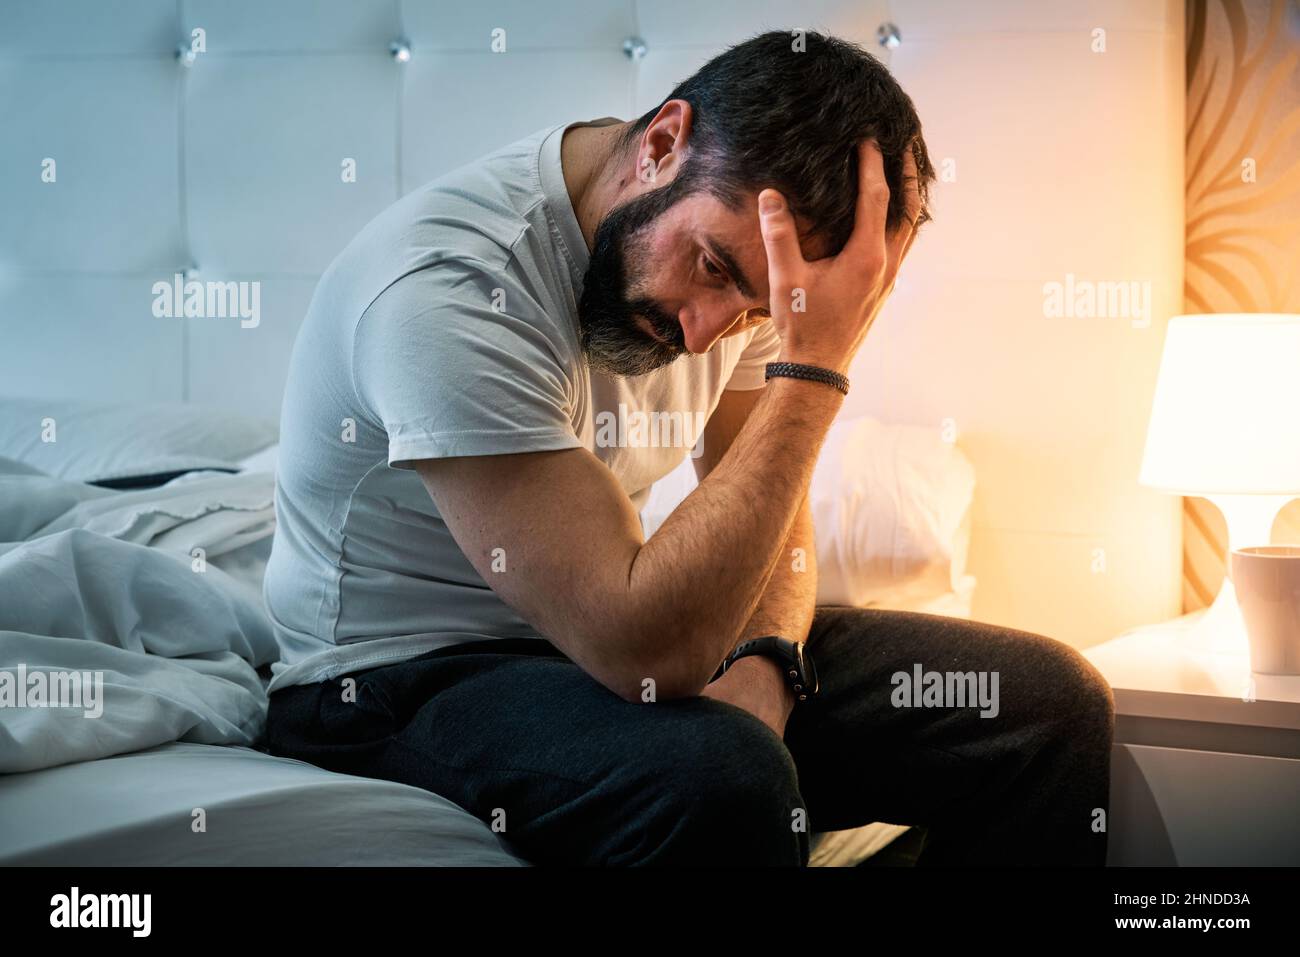 person with some kind of problem sitting on the bed and shaking their head while stirring their hair Stock Photo